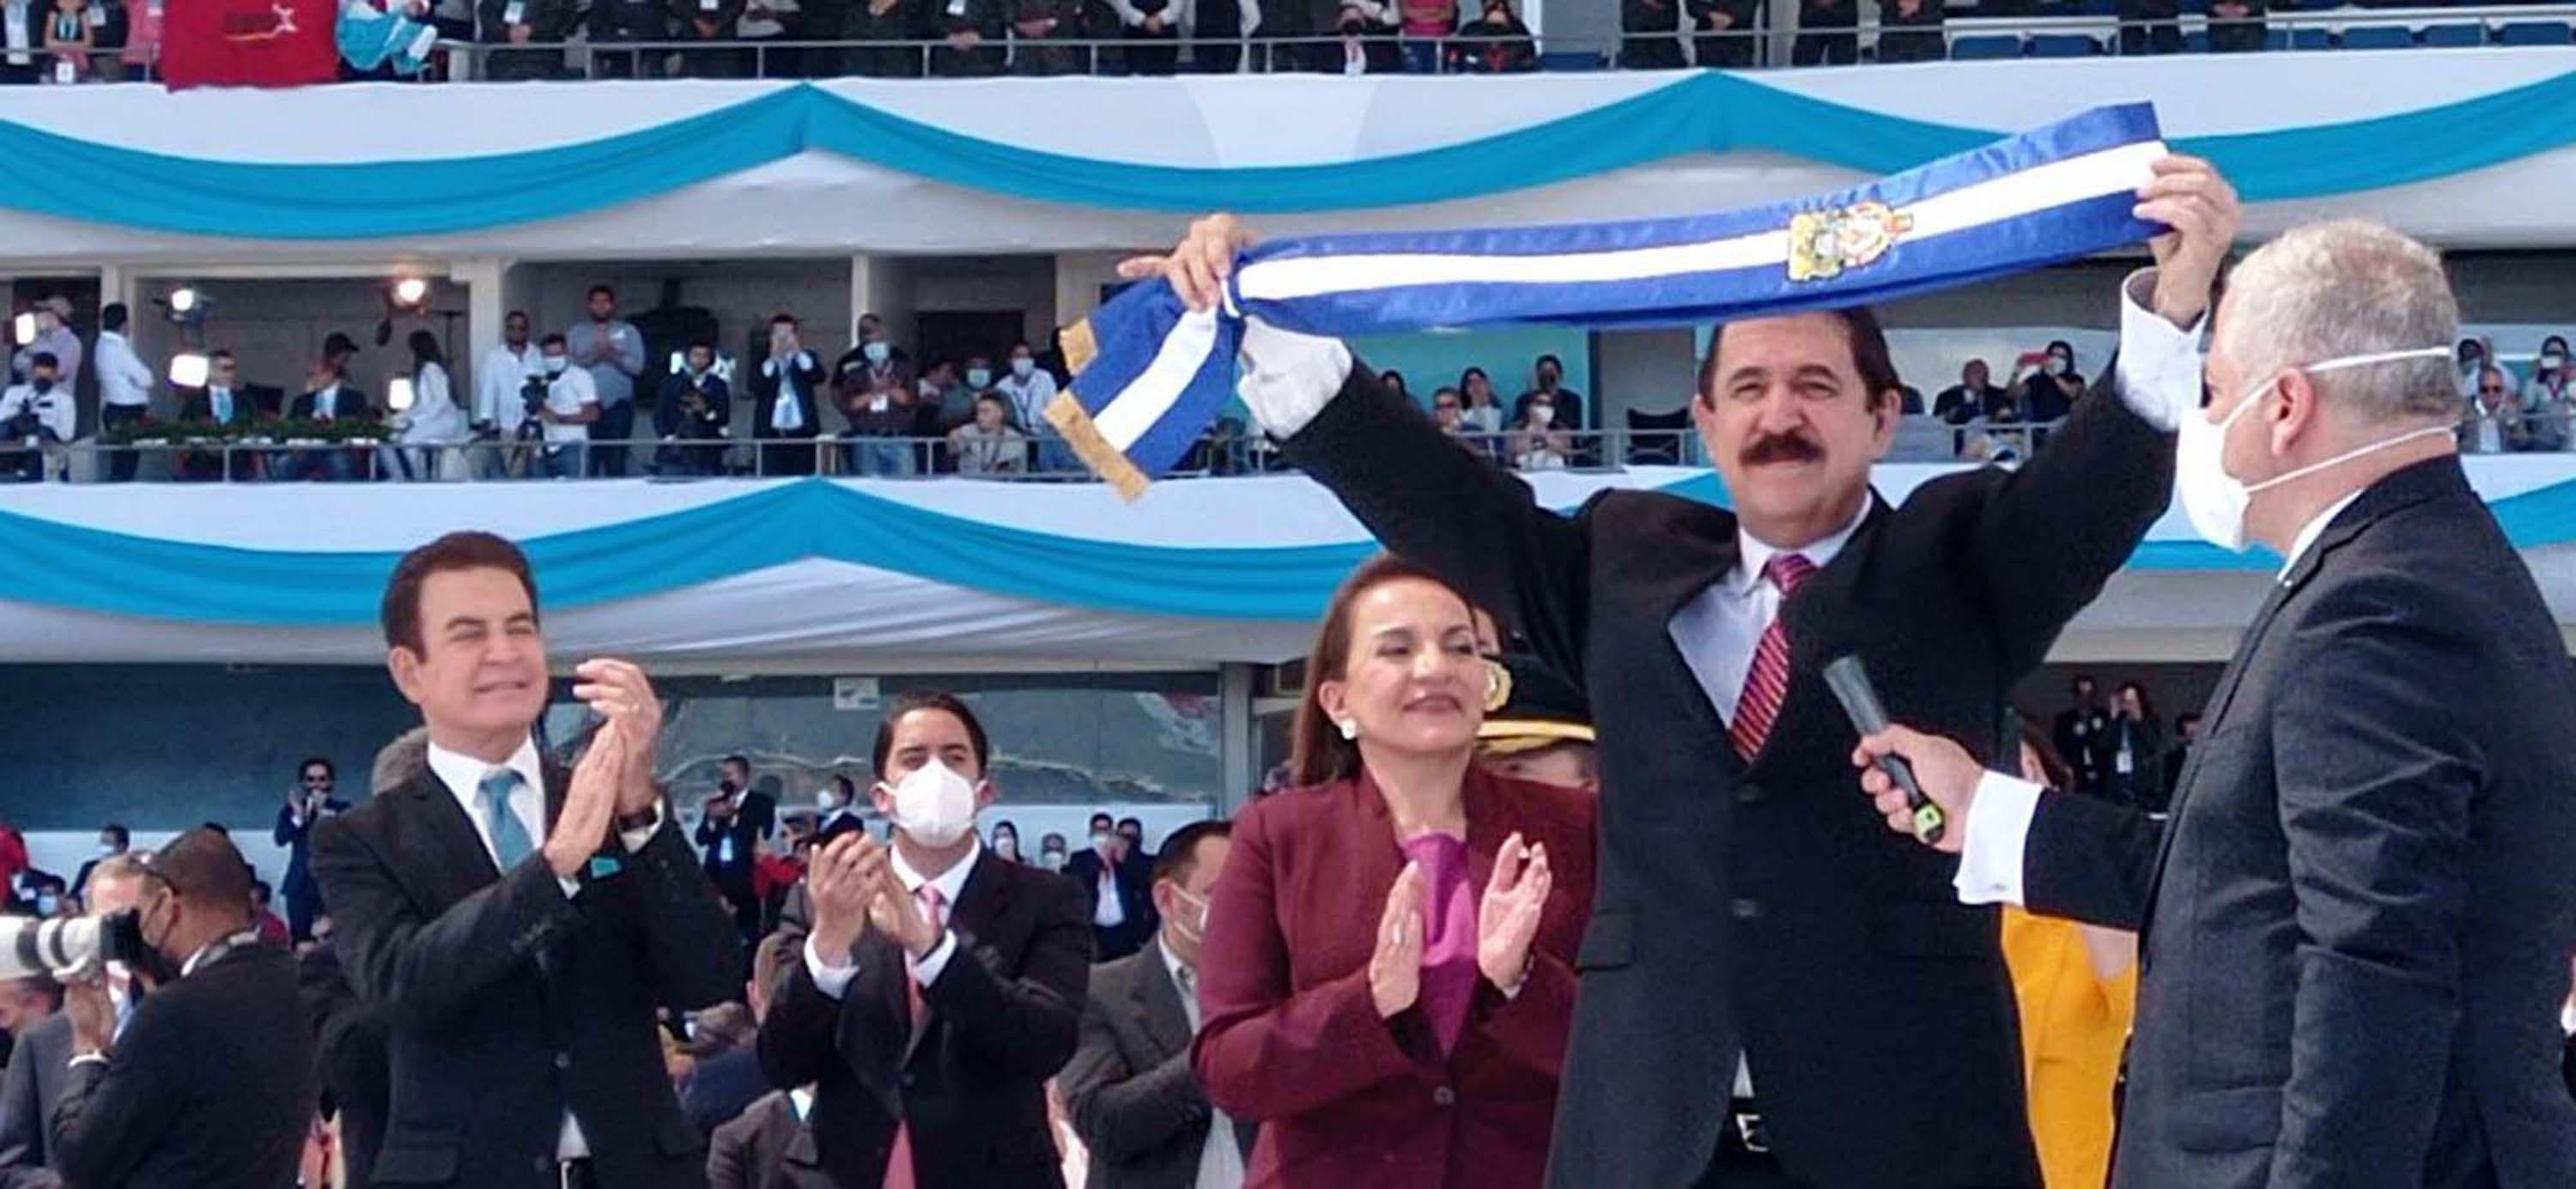 Honduran ex-president Manuel Zelaya (right) lifts the presidential sash at the Jan. 27 inauguration of Xiomara Castro (center). Vice President Salvador Nasralla (left) looks on. Photo published by Castro Administration.